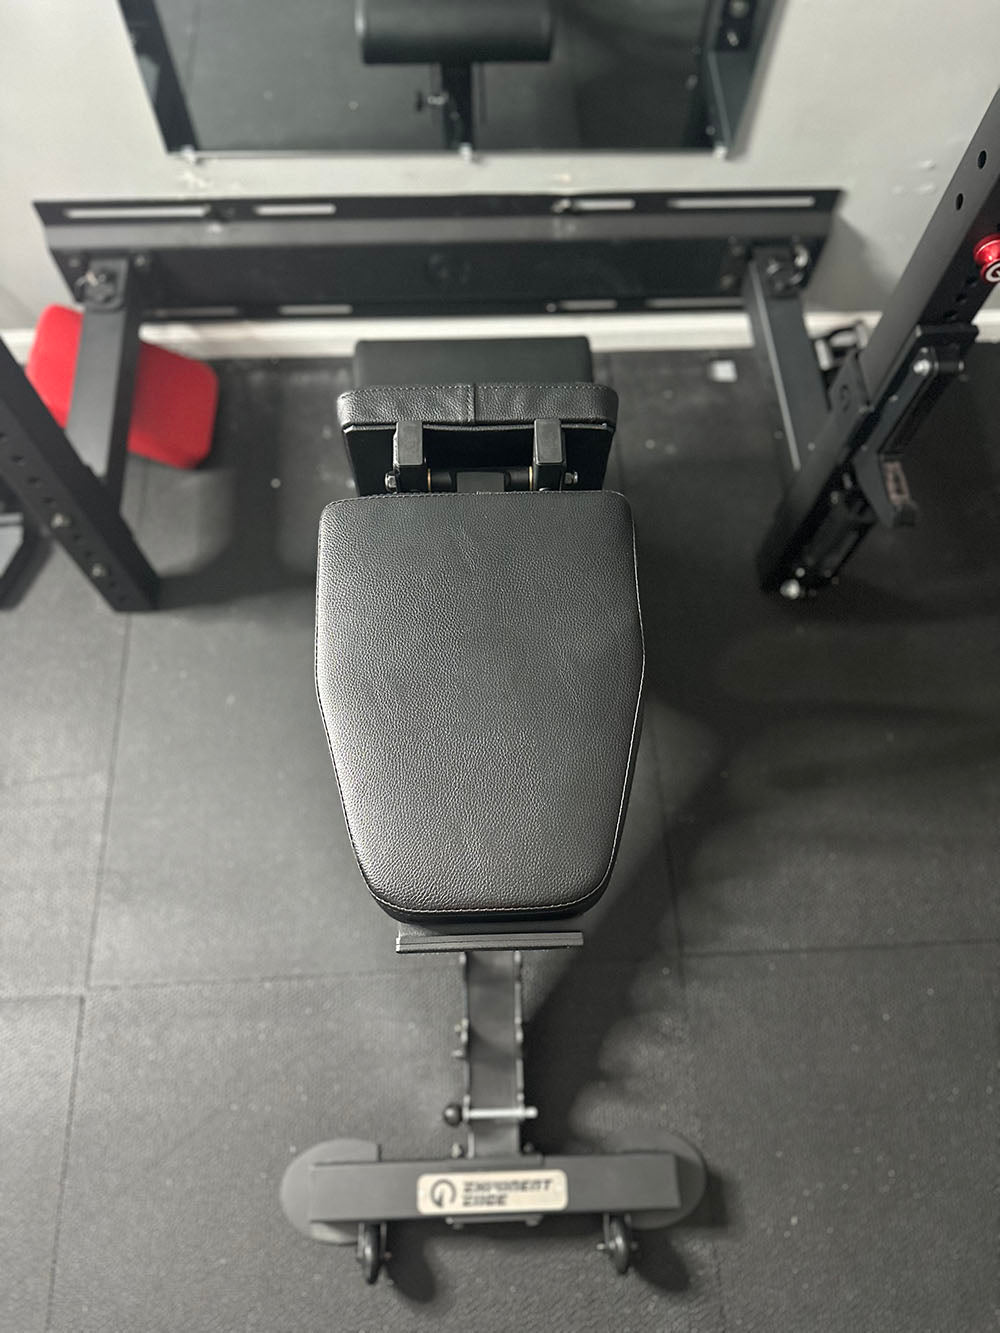 The Edge Infinity Bench is a bench that combines three separate benches all into one bench. You get the benefits of a flat bench, incline bench, and half bench all in one device. This image presents the bench from a top view.